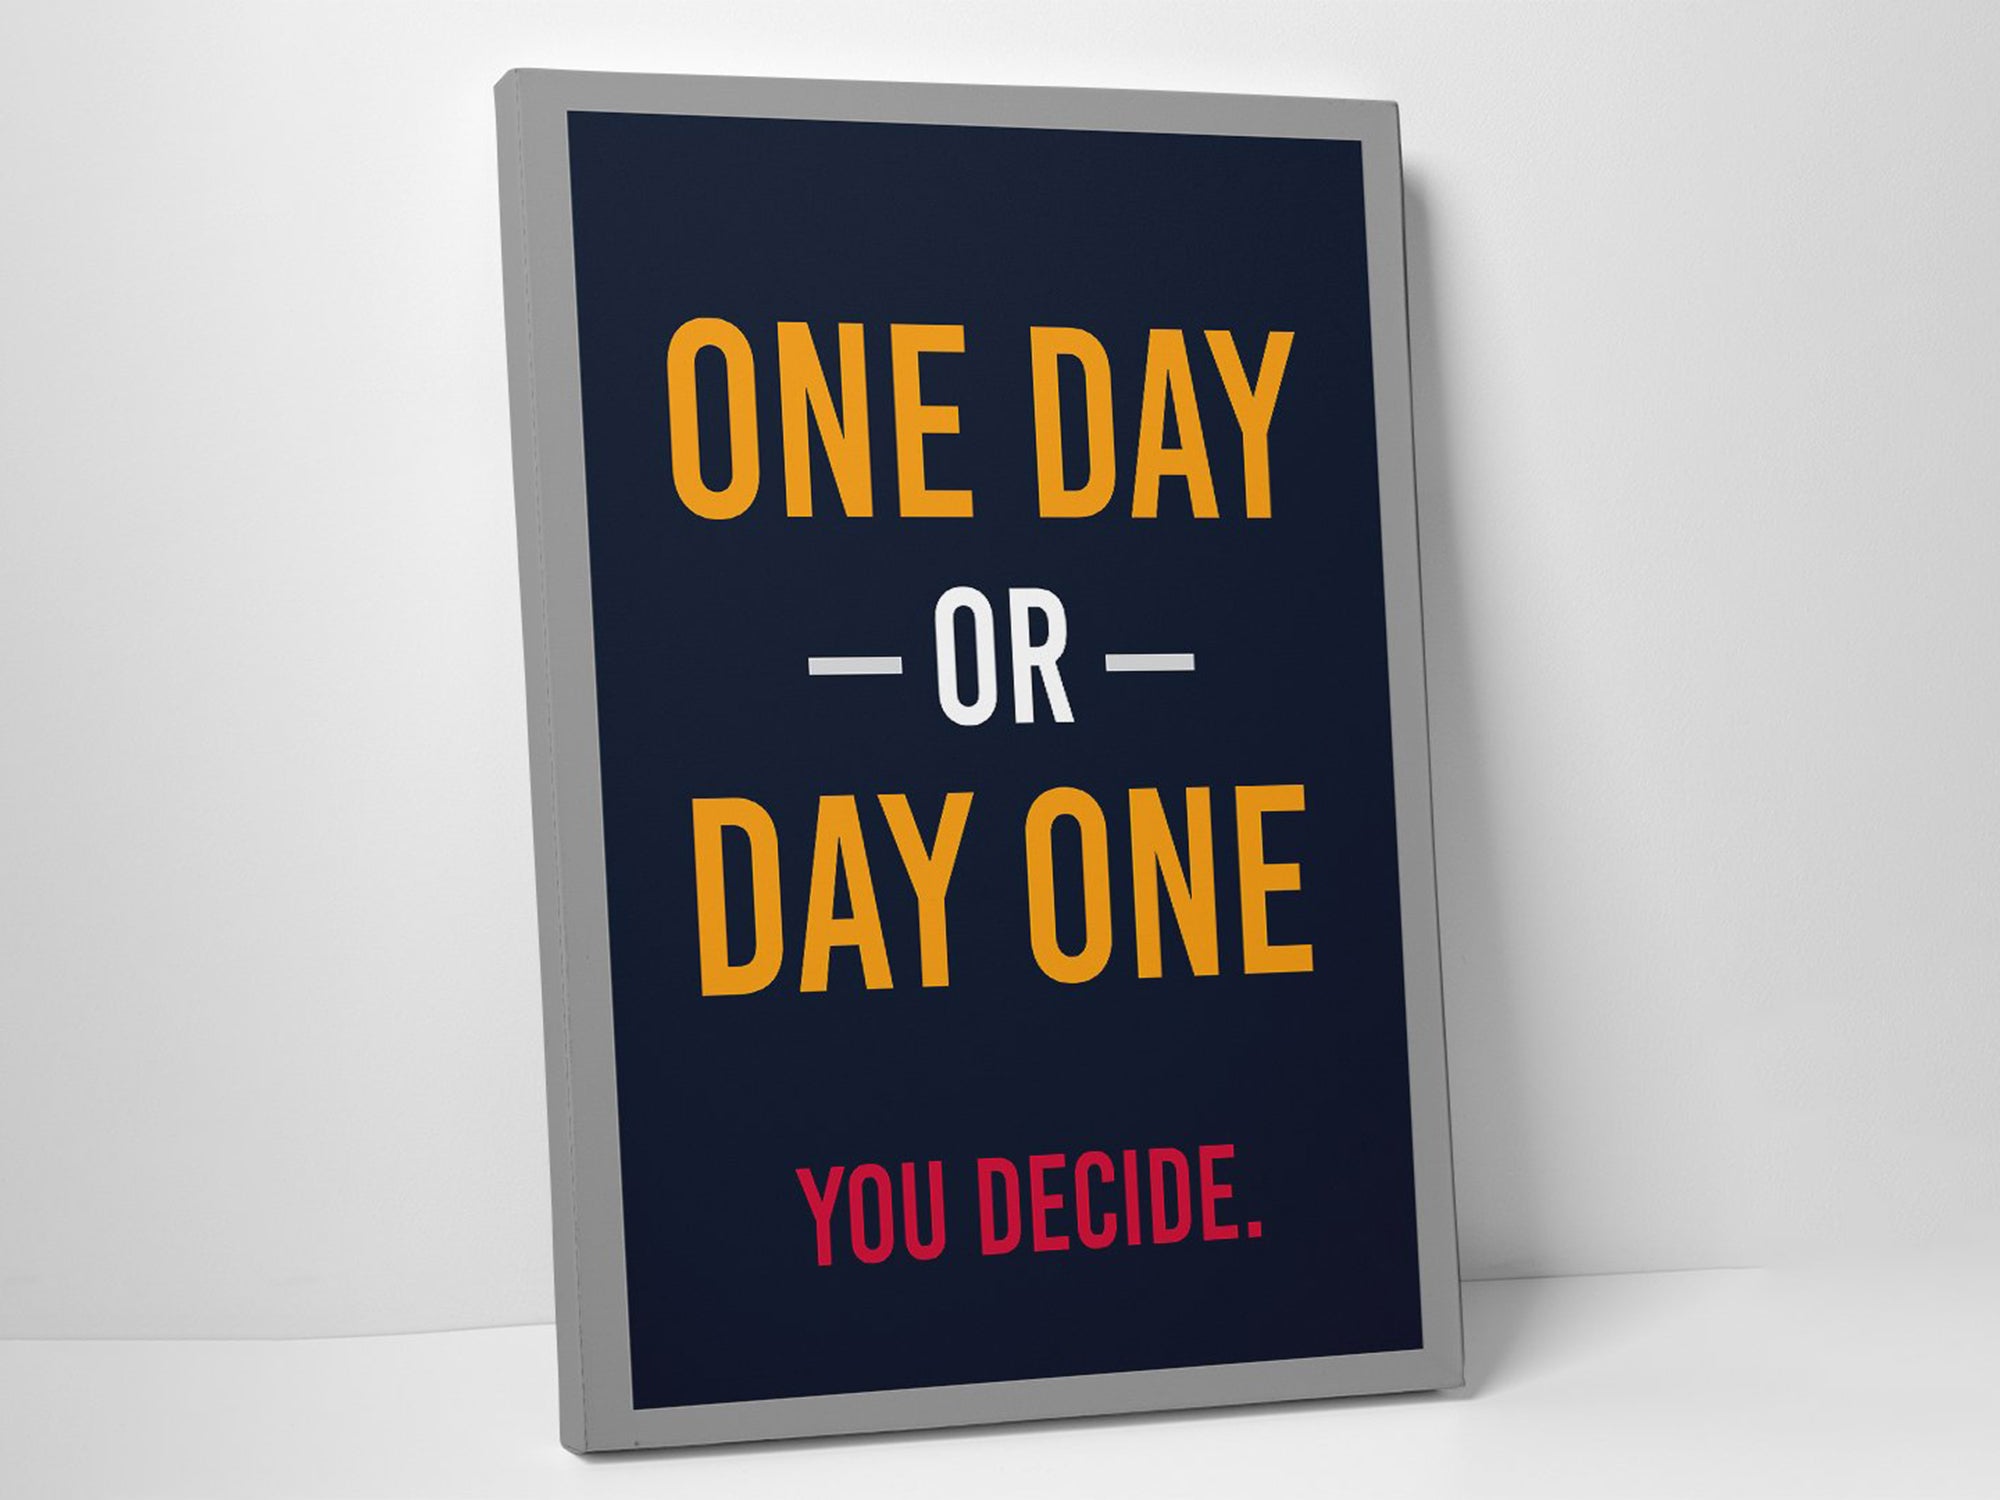 One Day or Day One - Inspiring - Canvas Wall Art